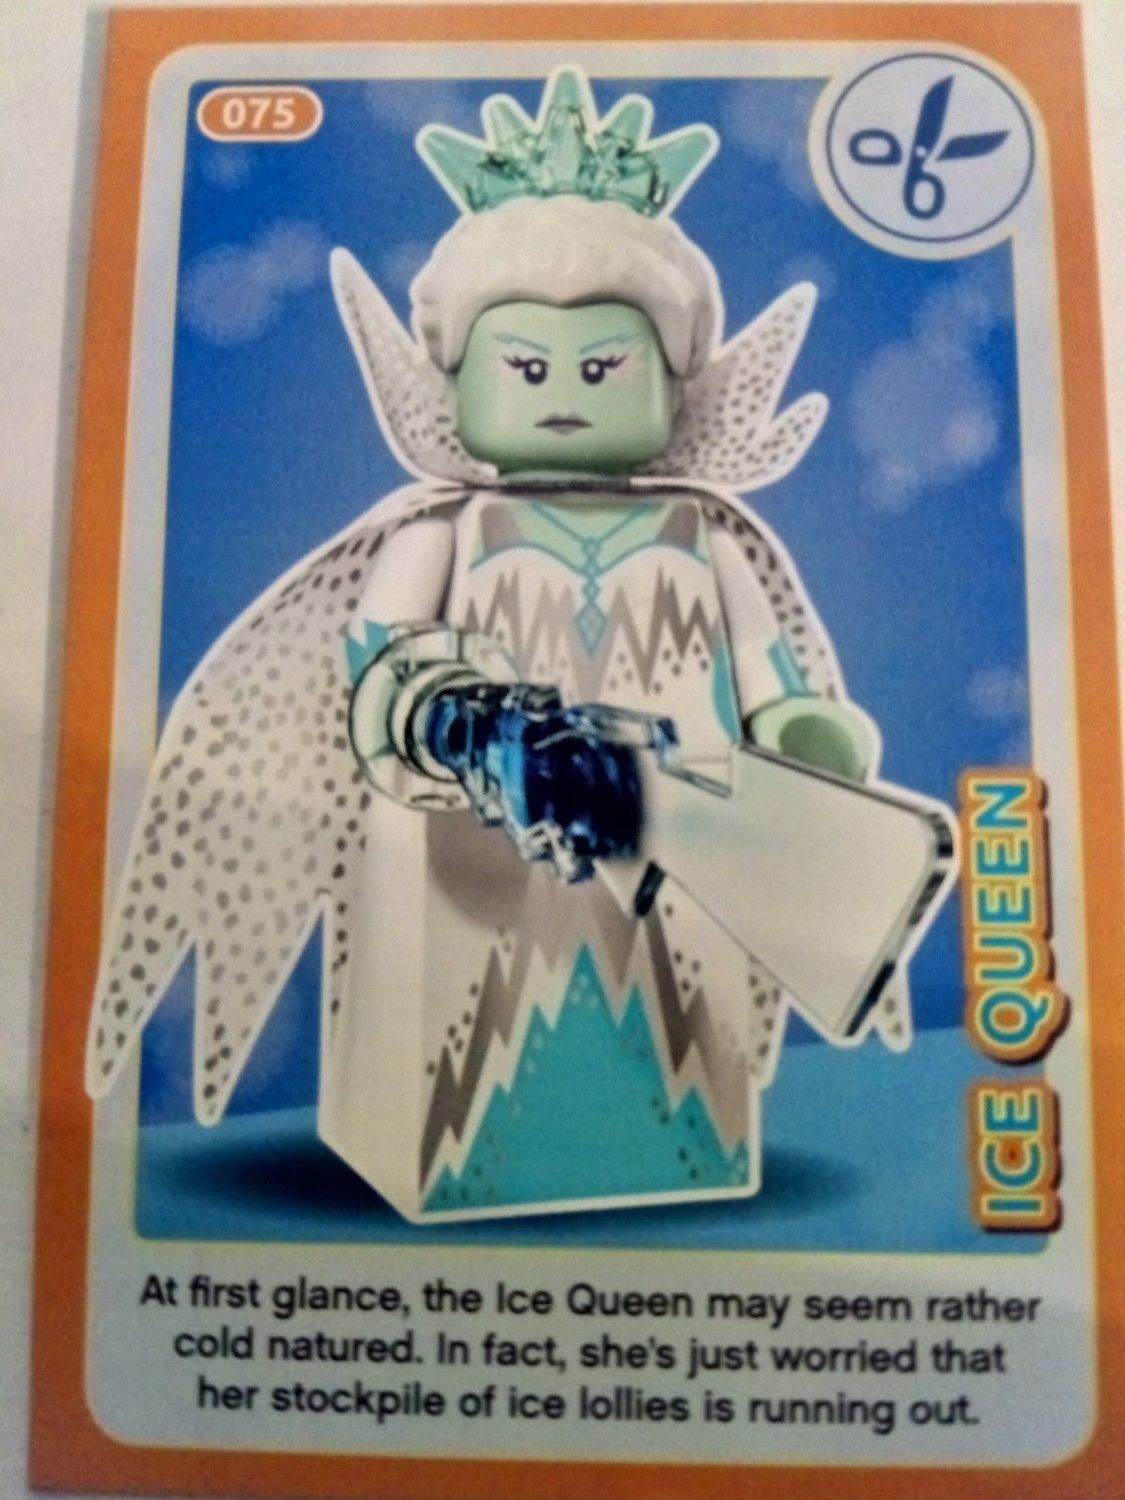 Ice Queen Sainsburys Lego Incredible Inventions 2018 Card 0075